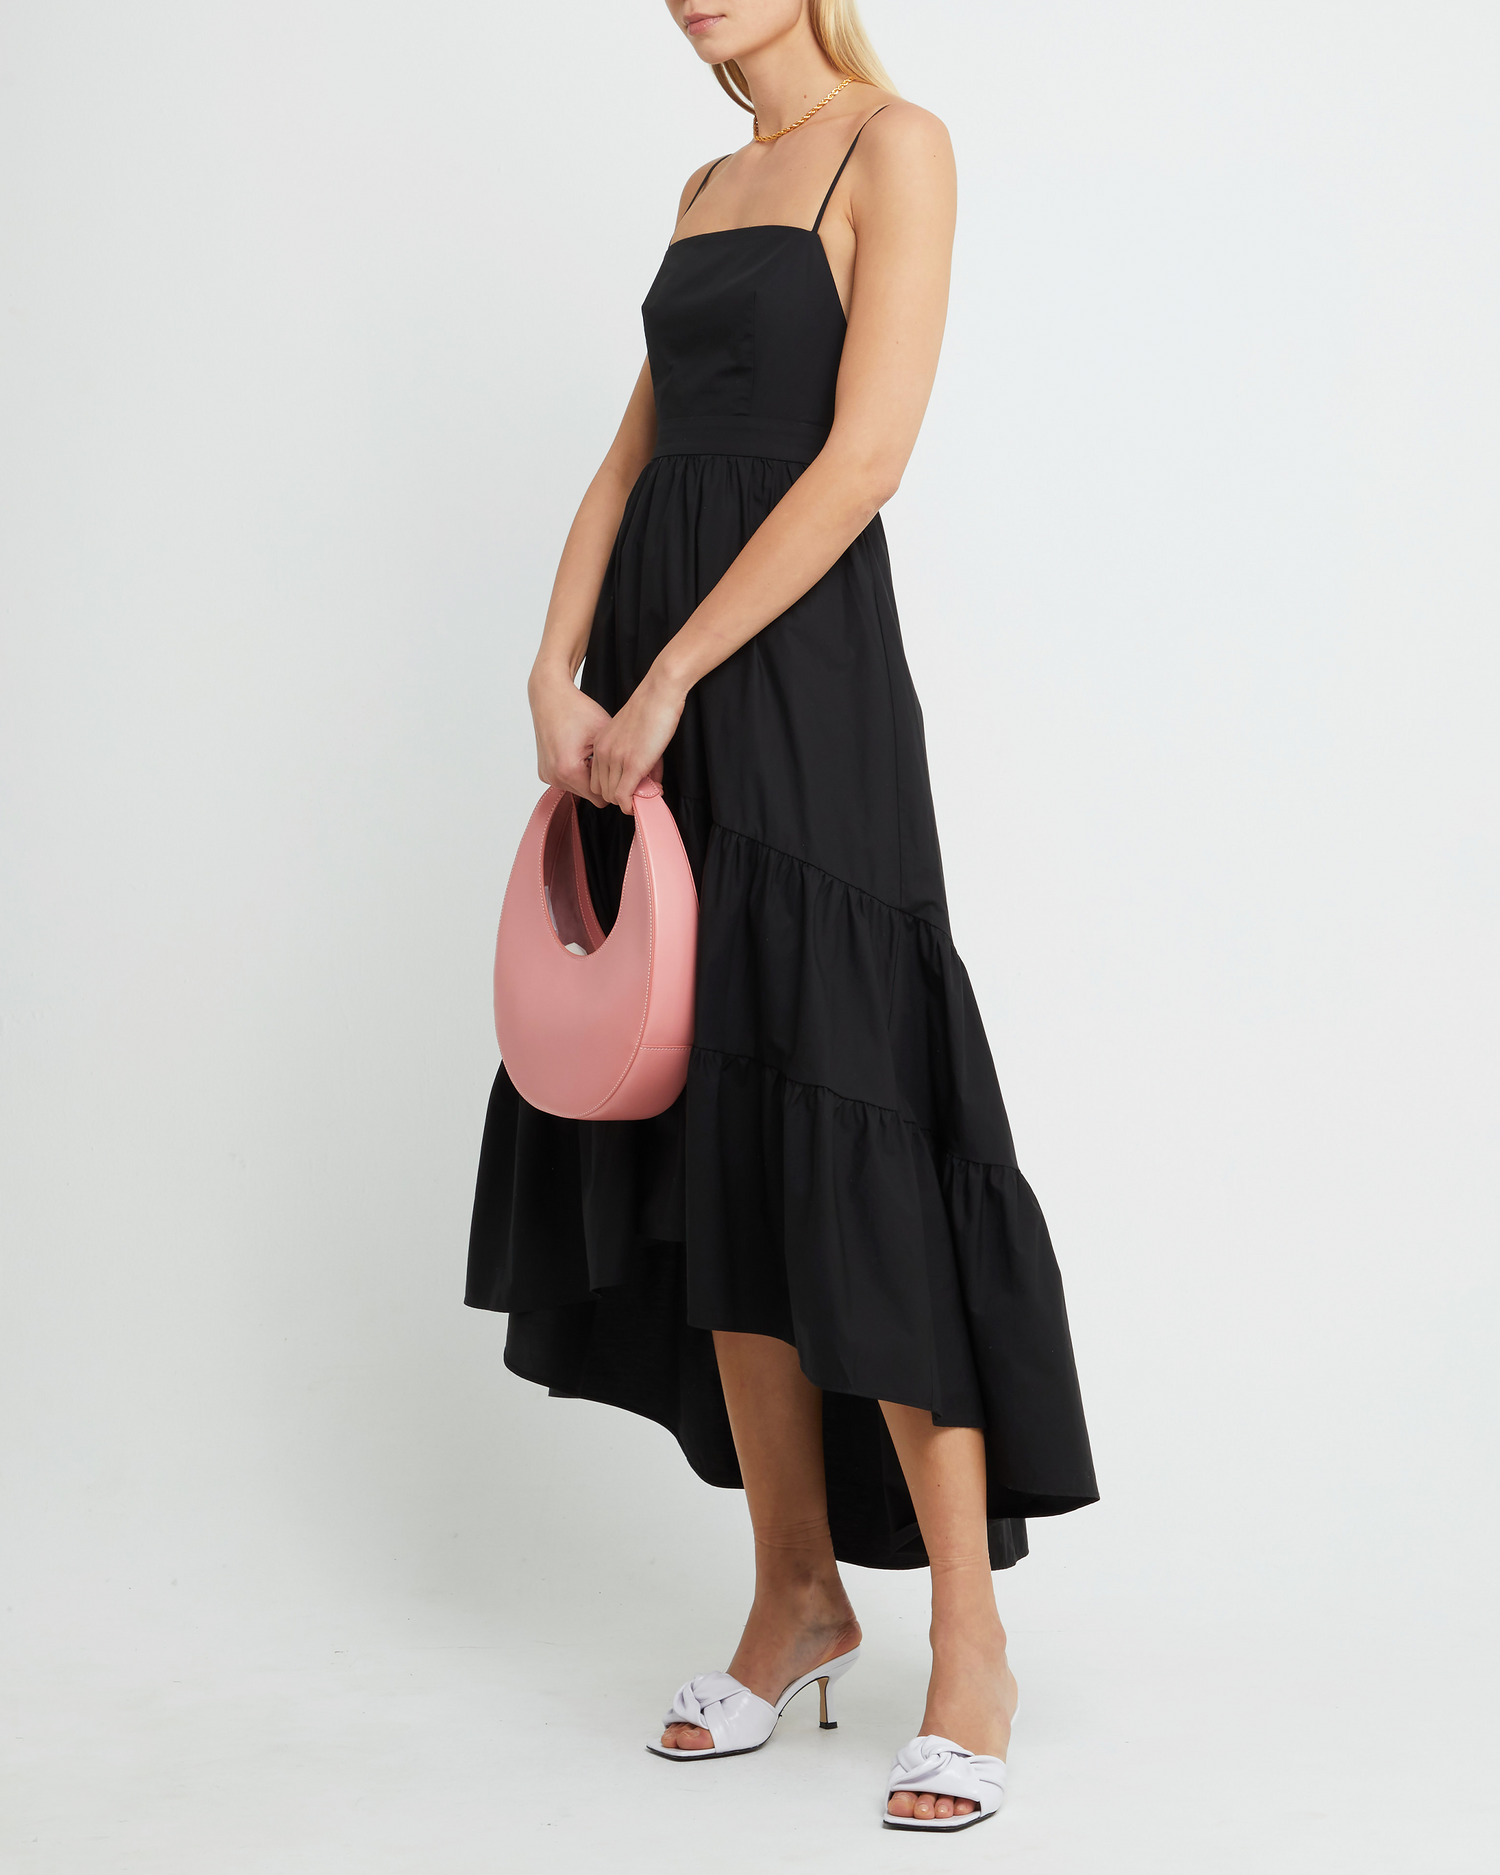 Fourth image of Dionne Cotton Dress, a black maxi dress, spaghette straps, high-low, high low skirt